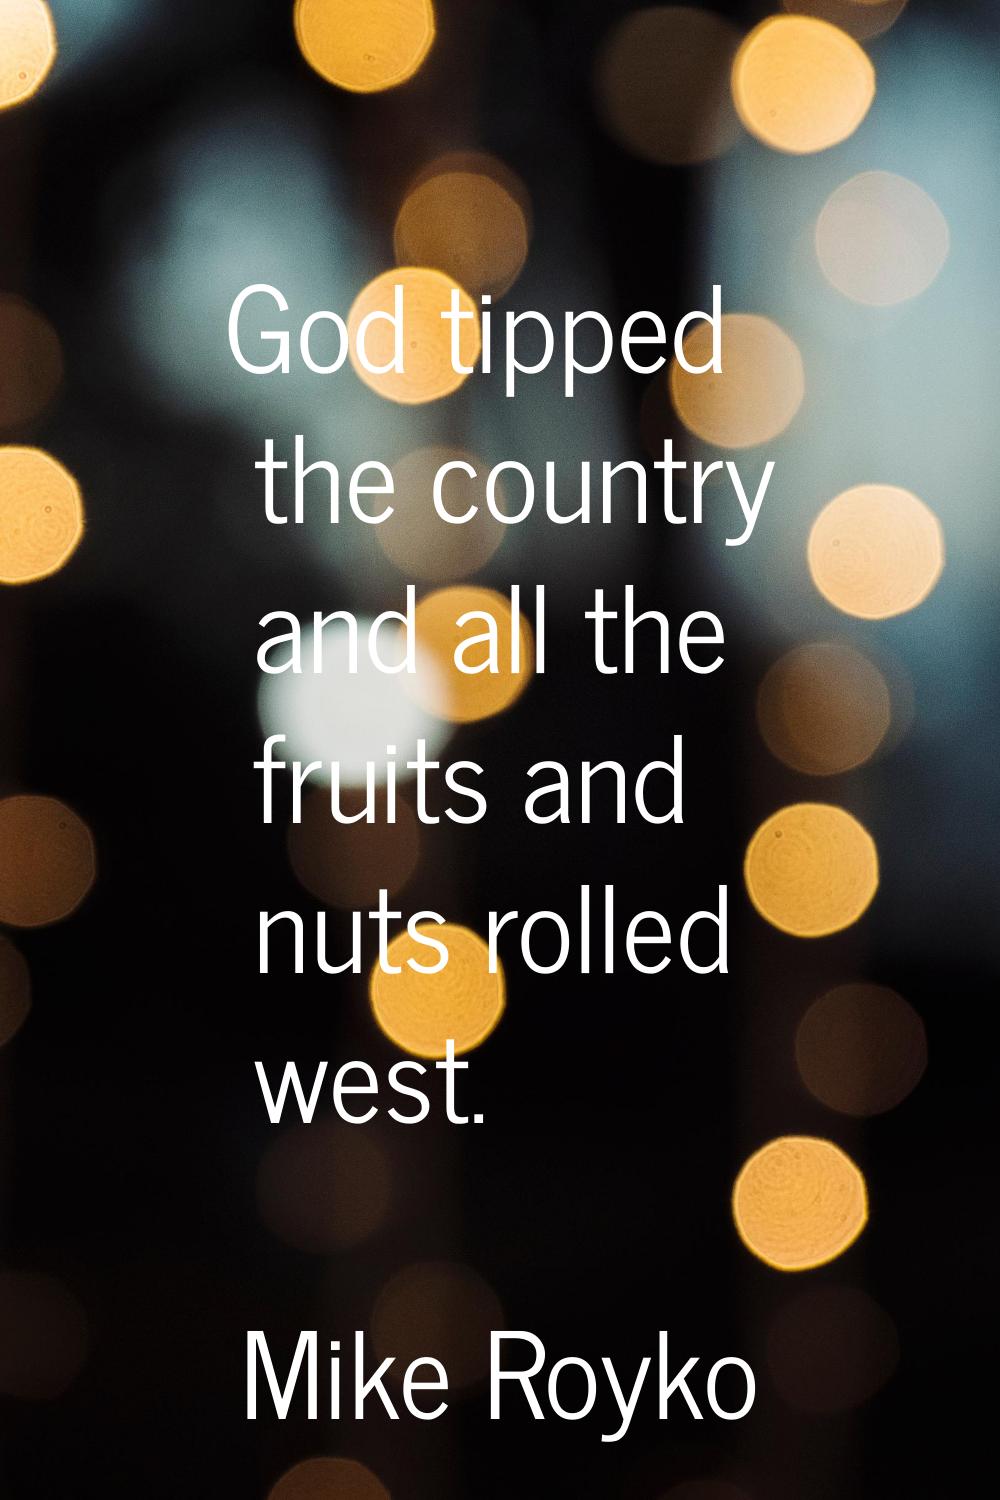 God tipped the country and all the fruits and nuts rolled west.